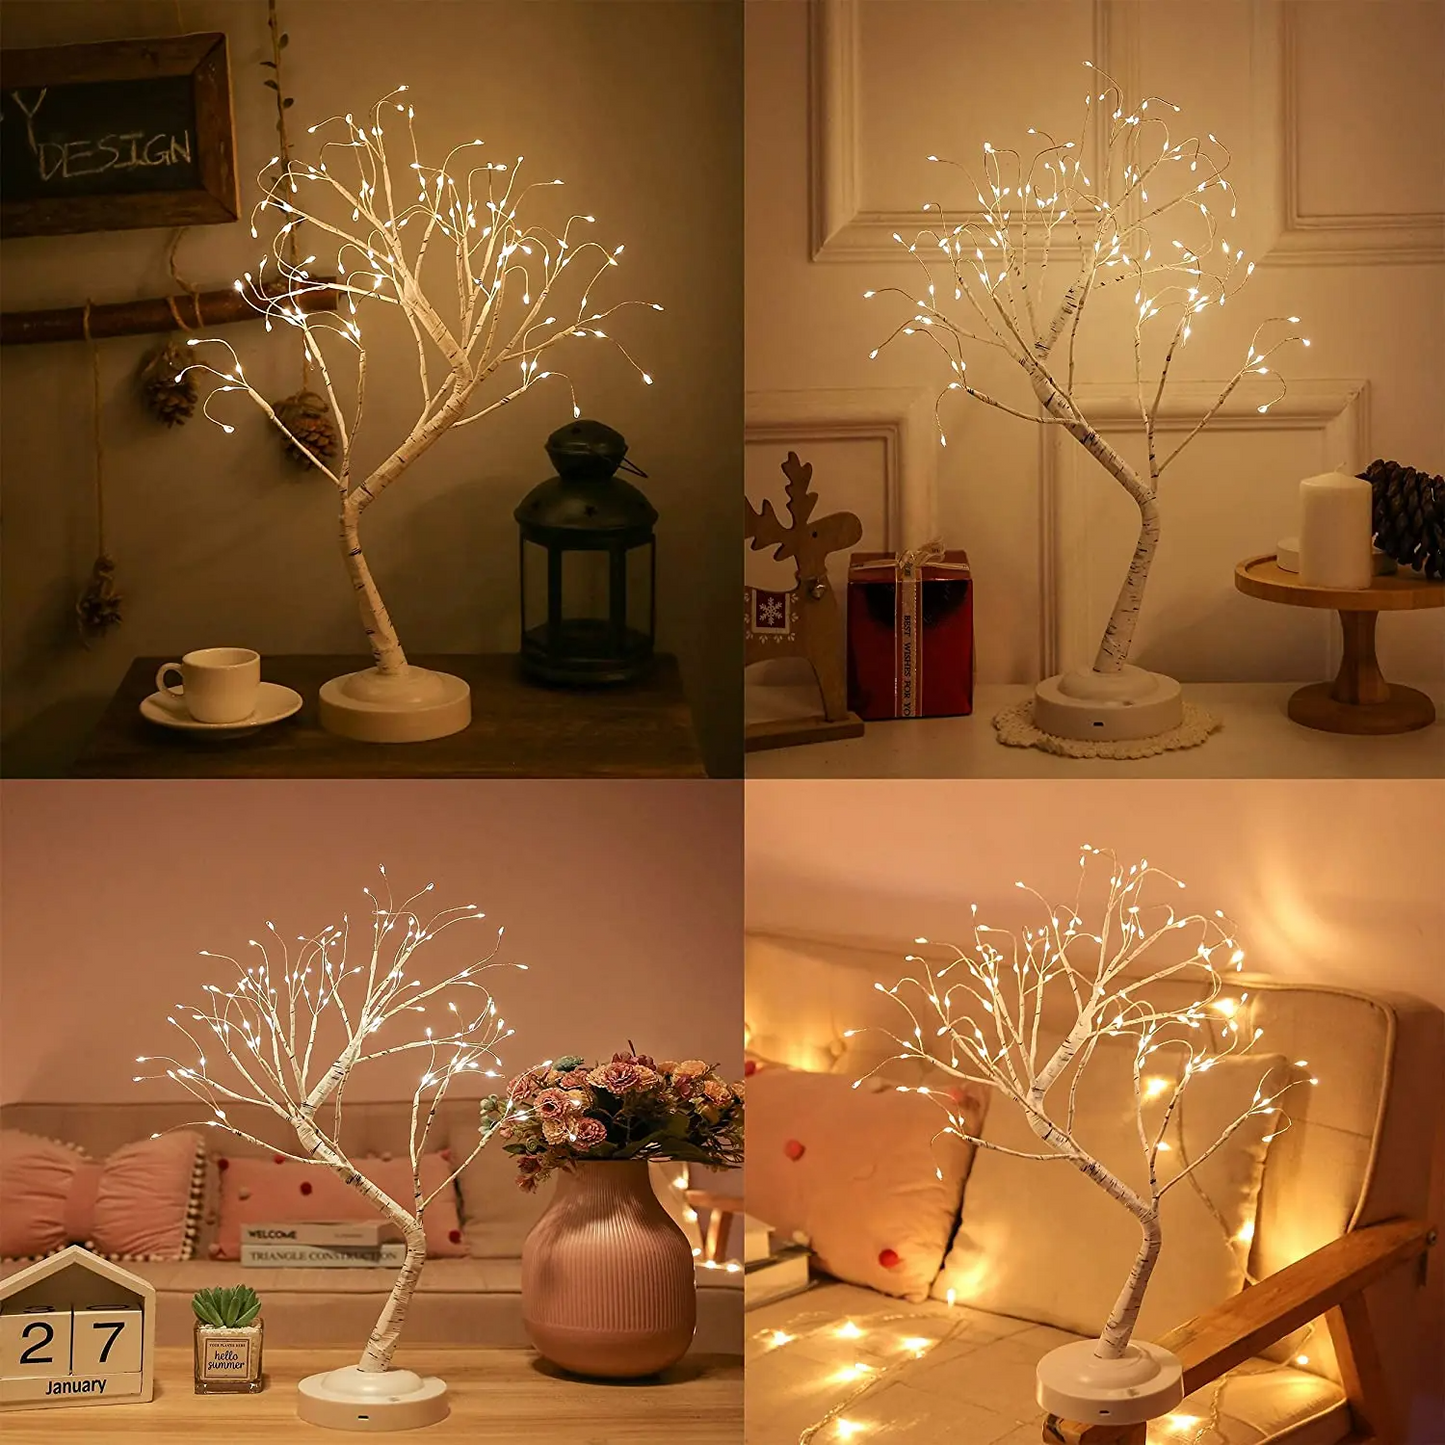 LED night light with stylish appeal